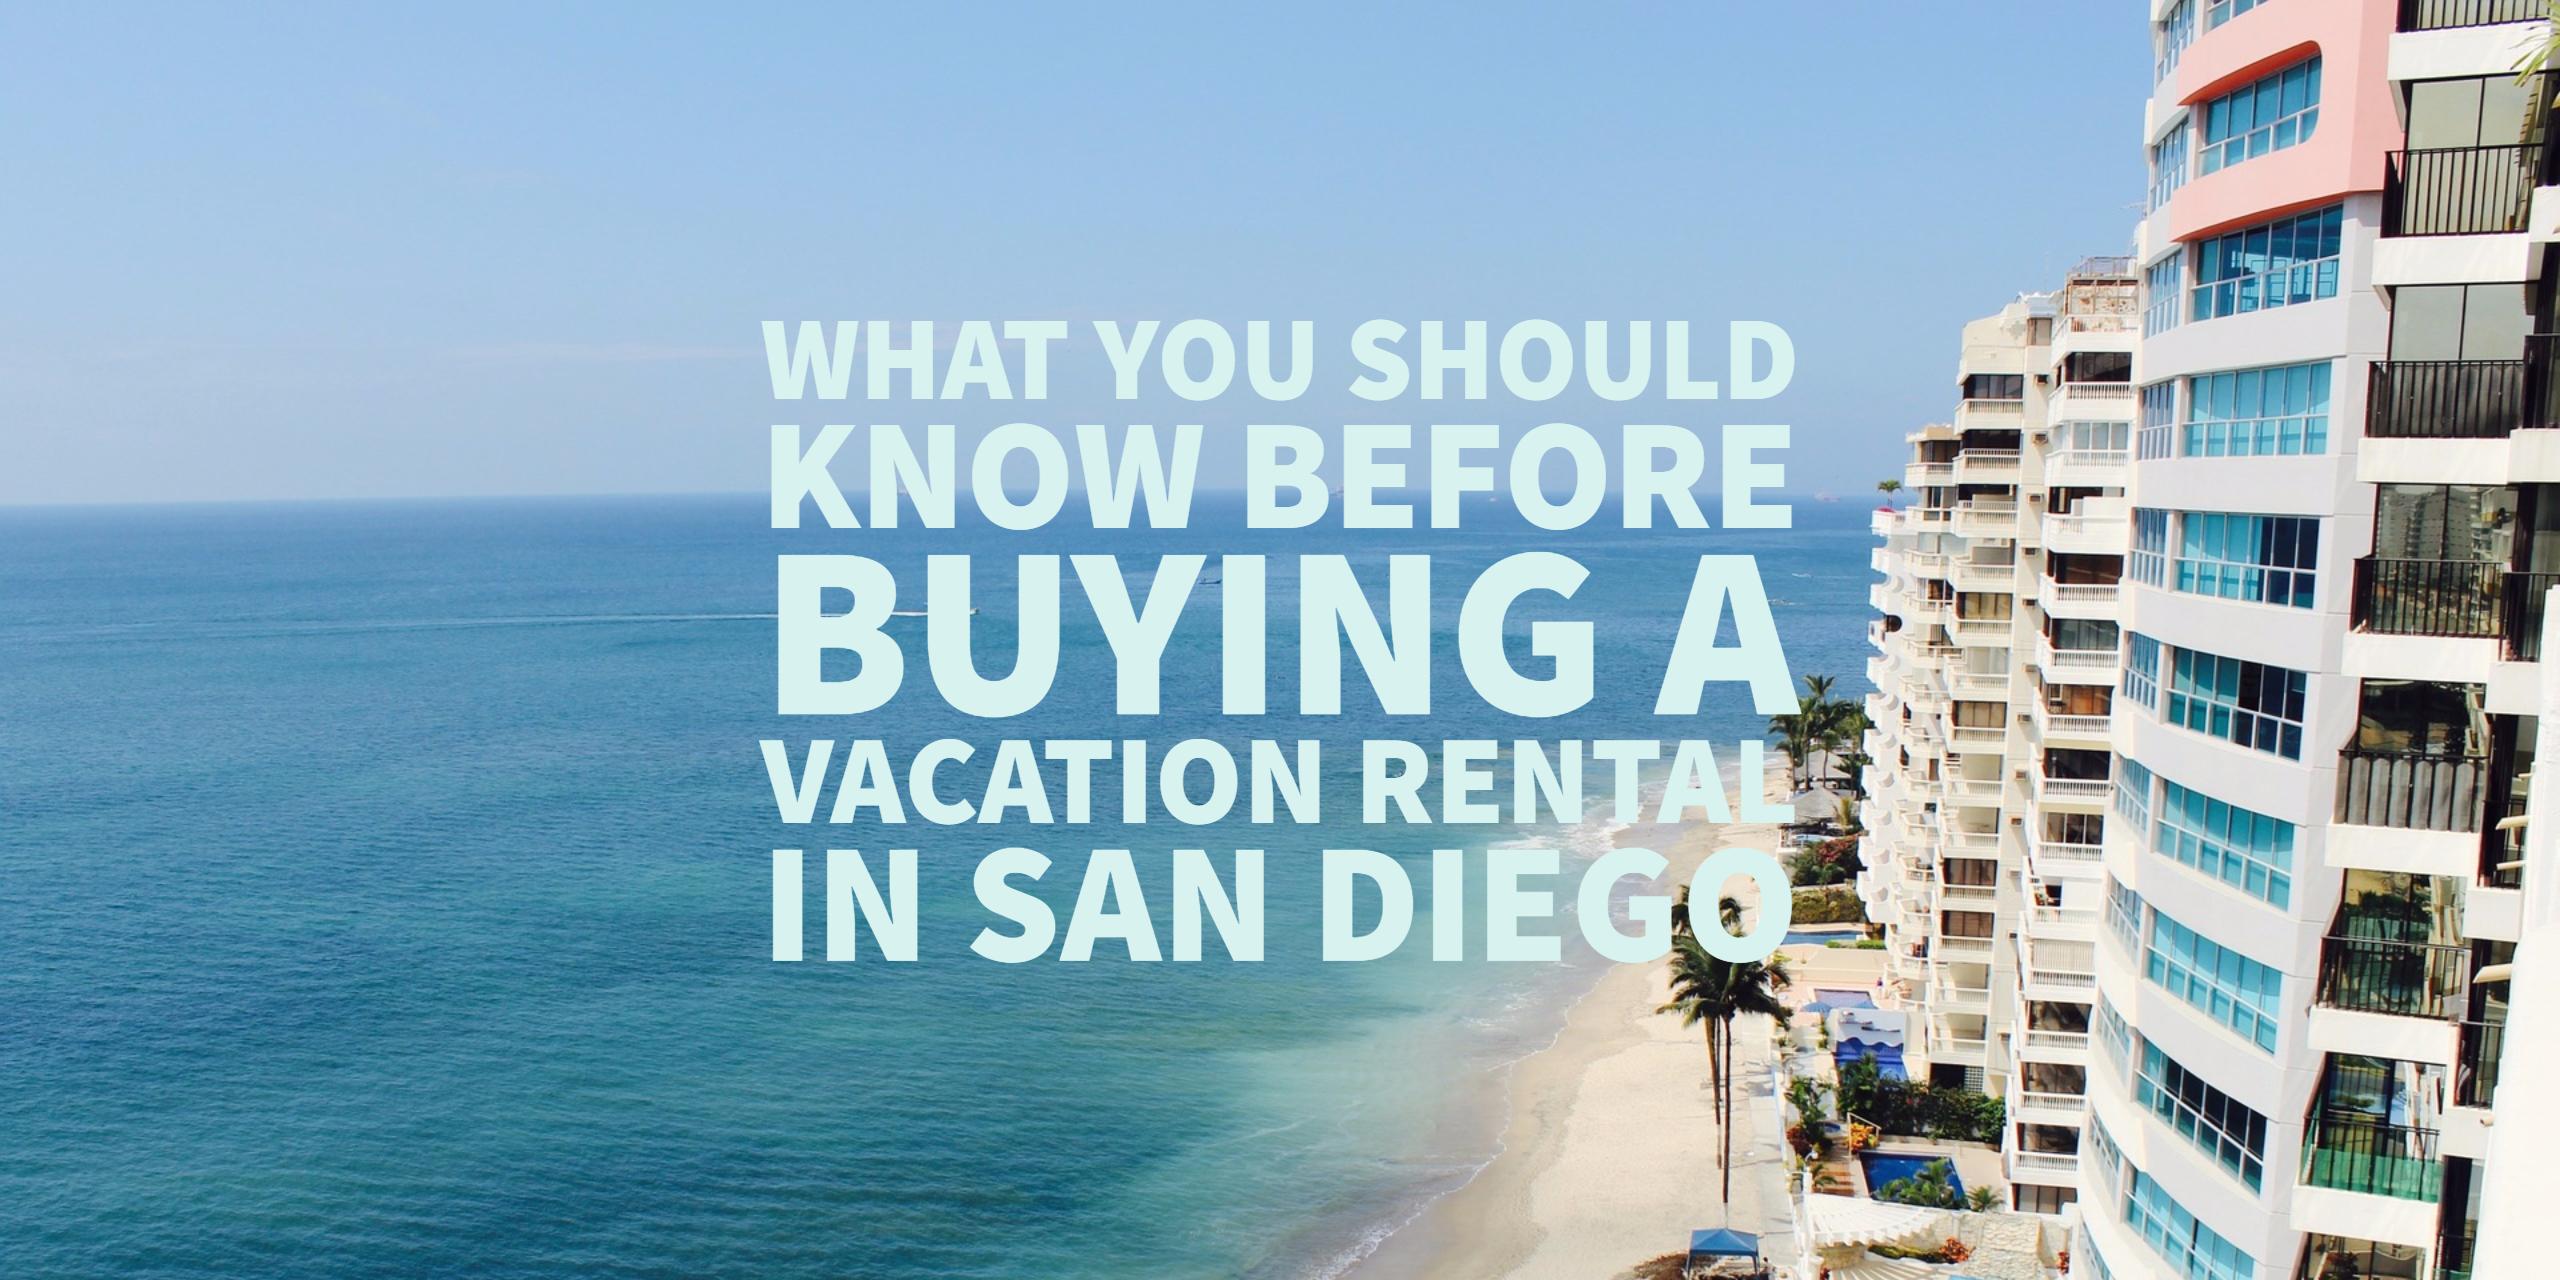 What You Should Know Before Buying a Vacation Rental in San Diego